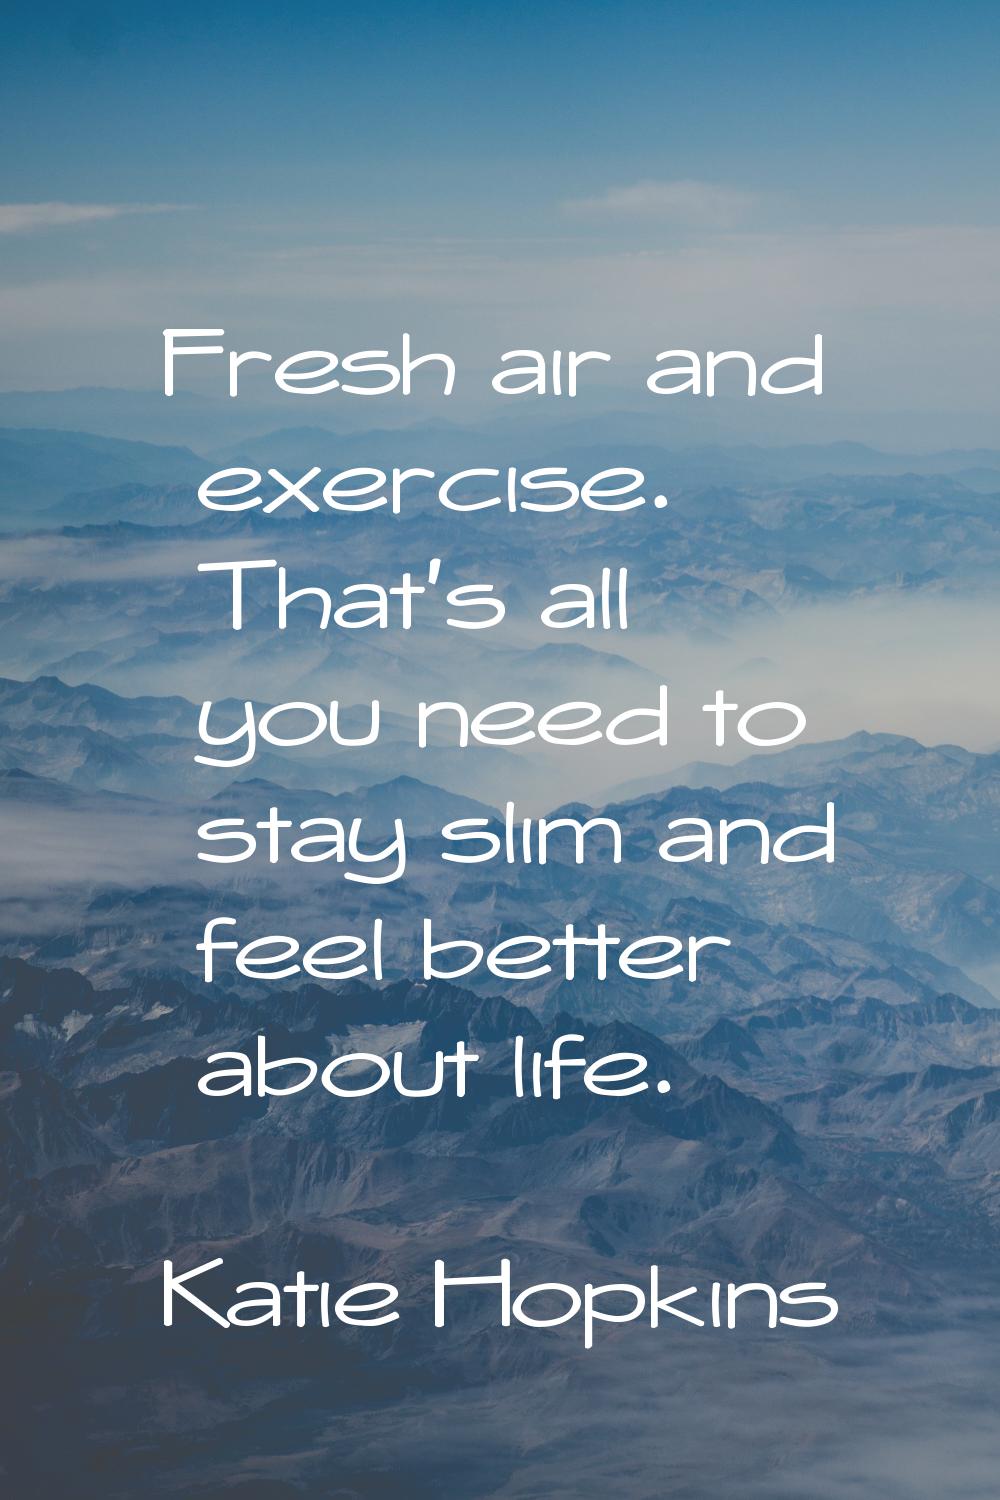 Fresh air and exercise. That's all you need to stay slim and feel better about life.